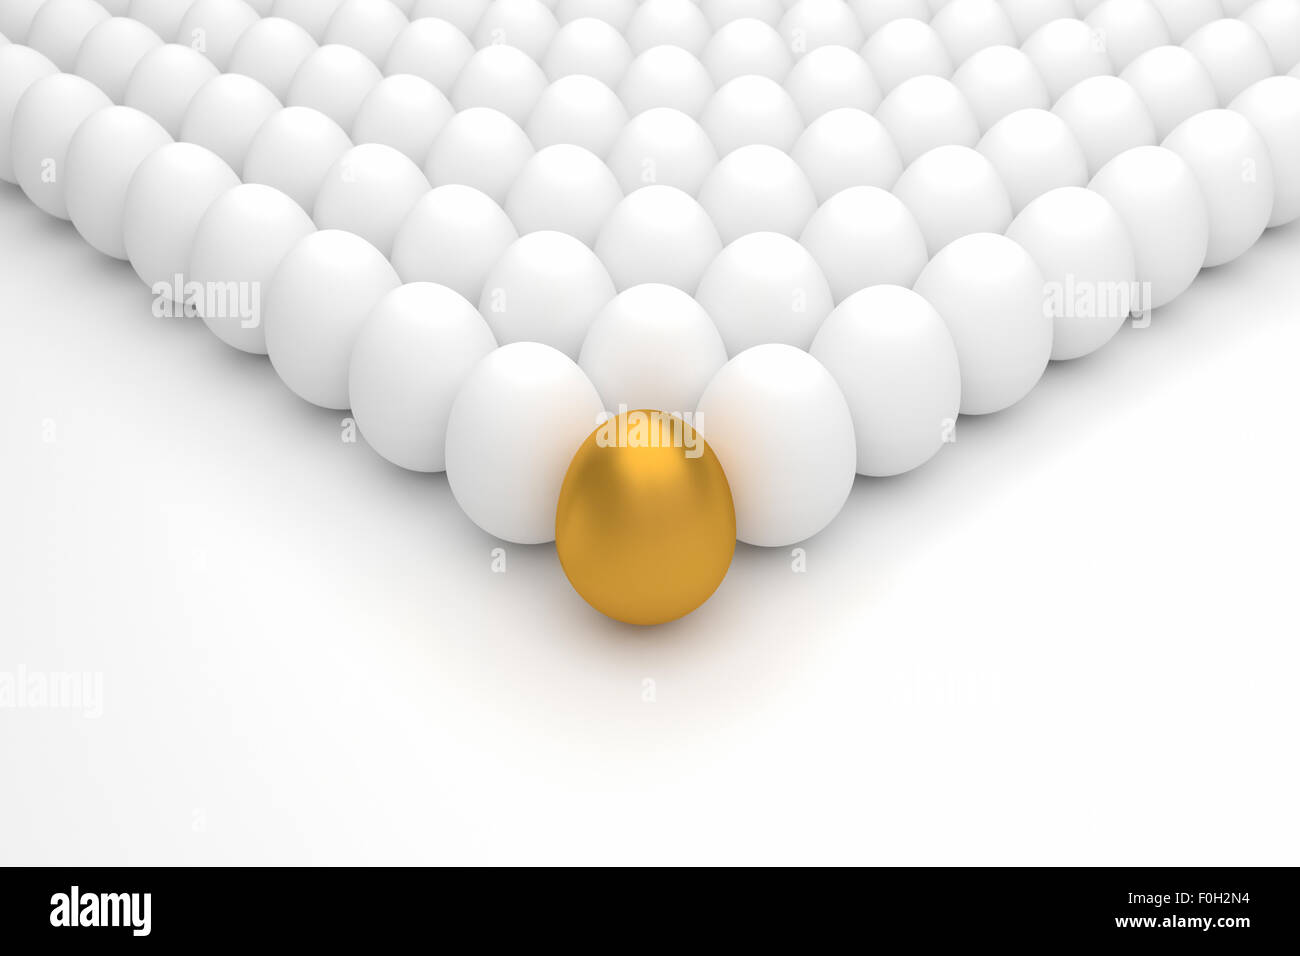 Business Concept with golden egg Stock Photo